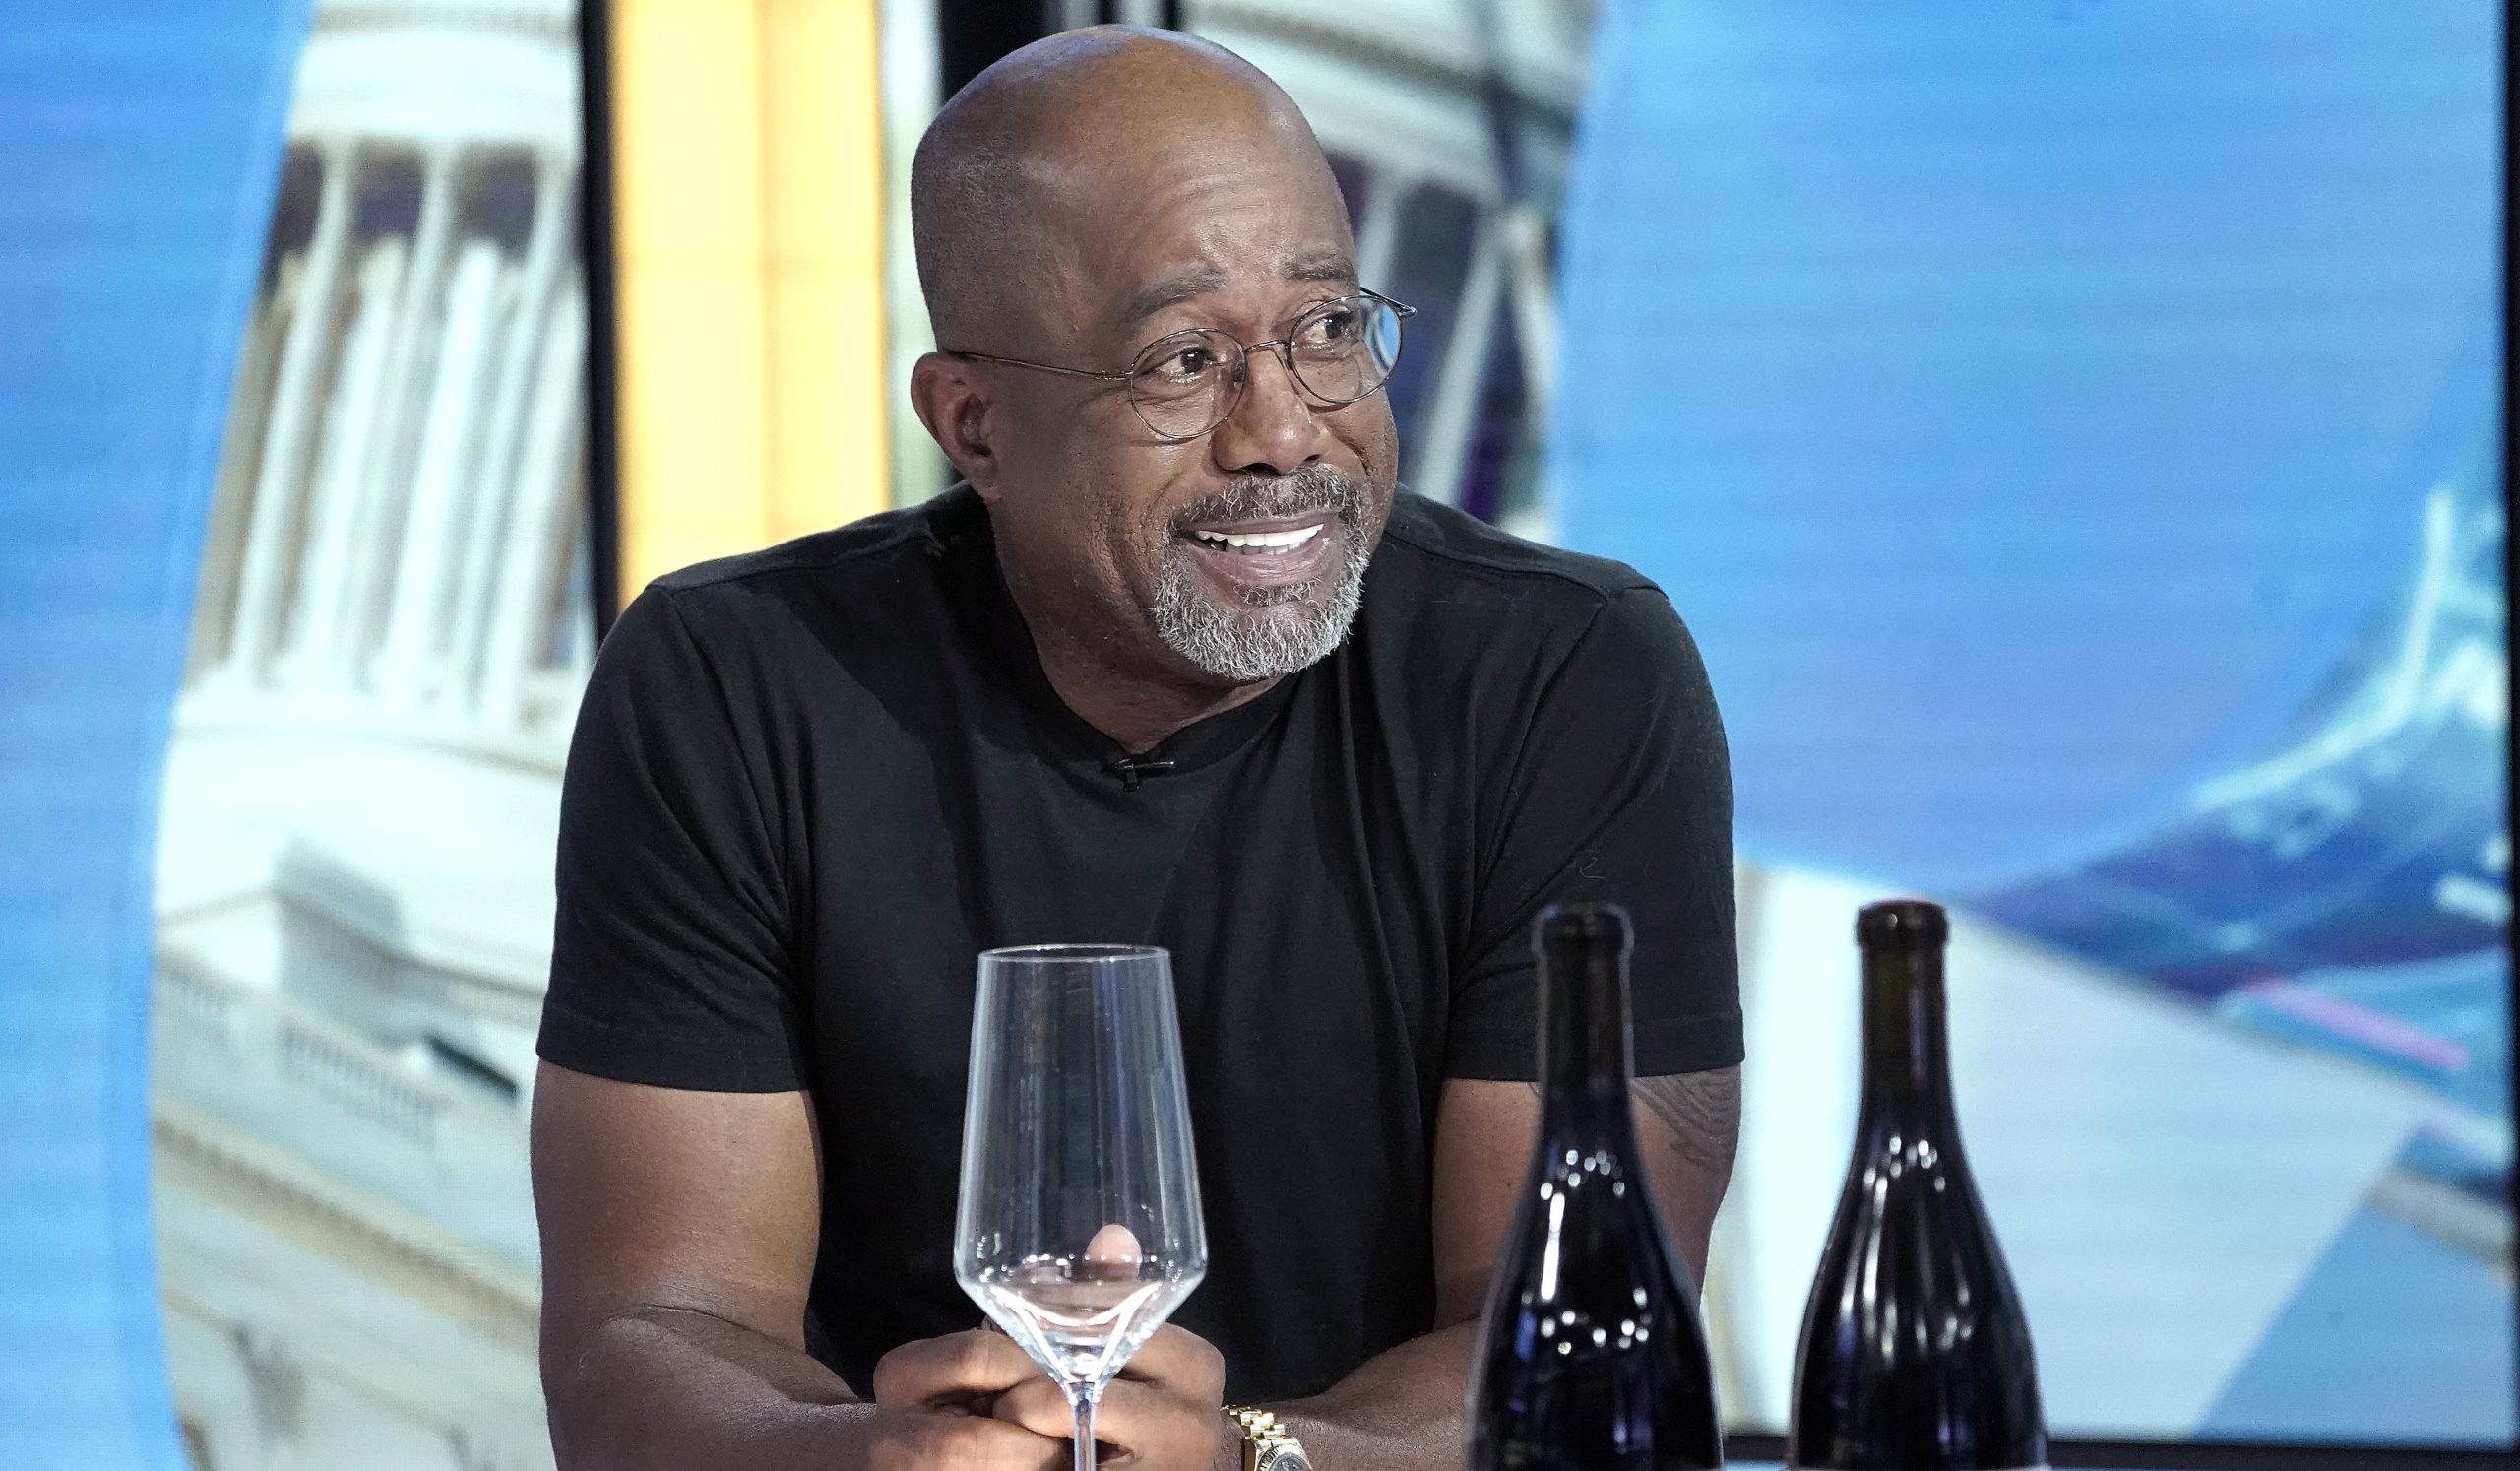 Darius Rucker uncorks the truth about the wine industry in latest side hustle: 'About making a good product'